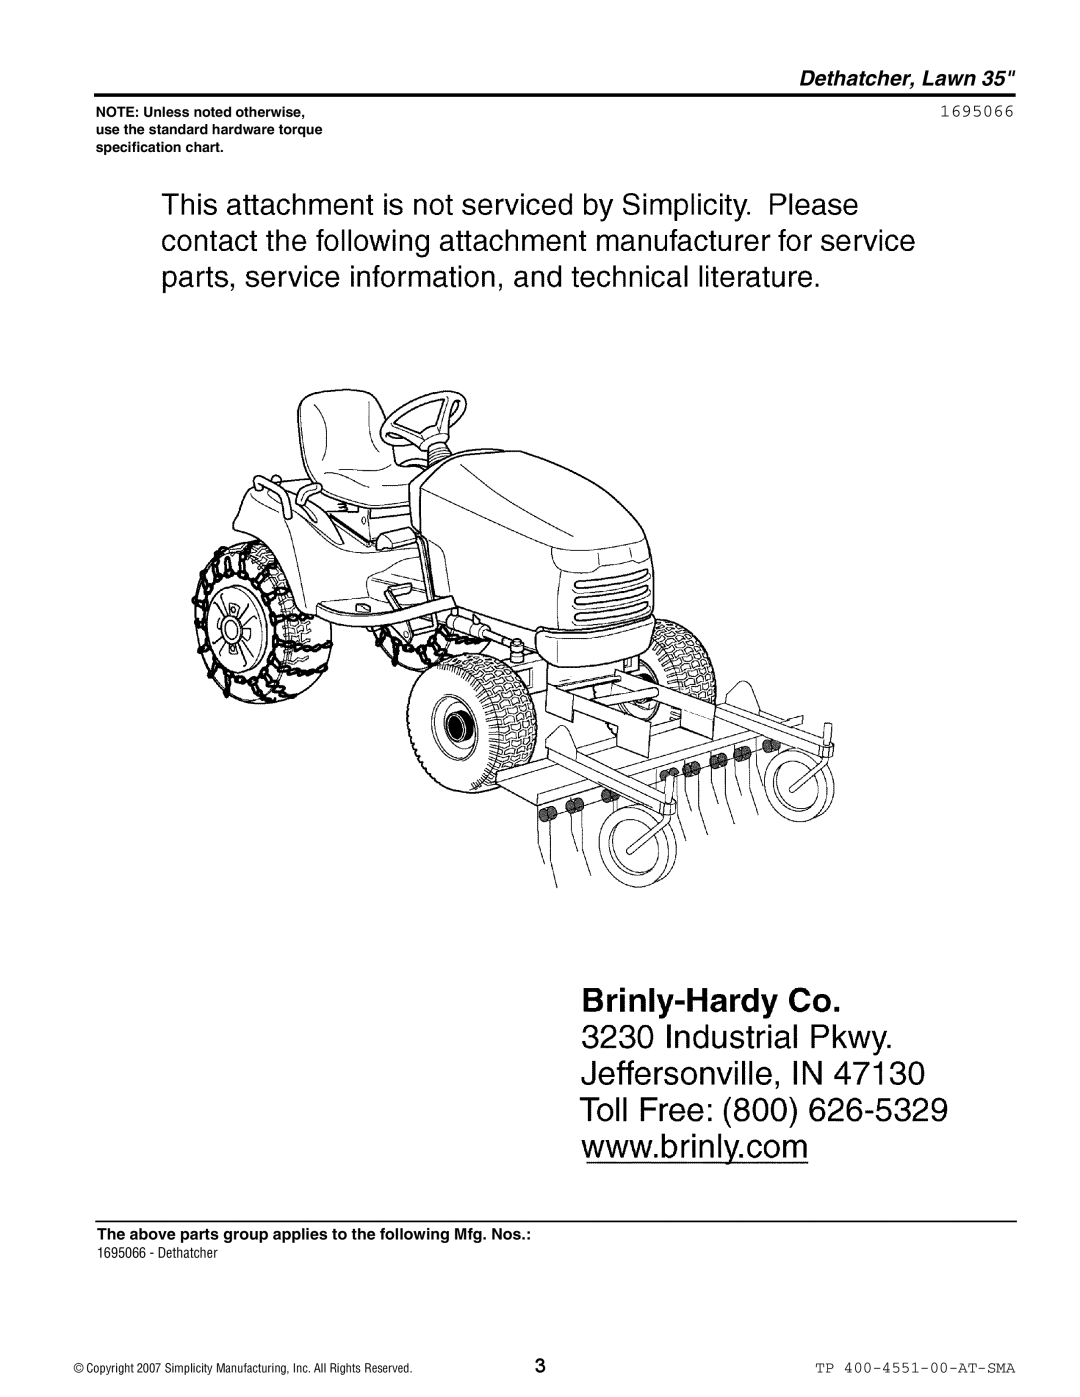 Snapper 4551 Dethatcher, Lawn, NOTE Unless noted otherwise, use the standard hardware torque, specification chart, 1695066 